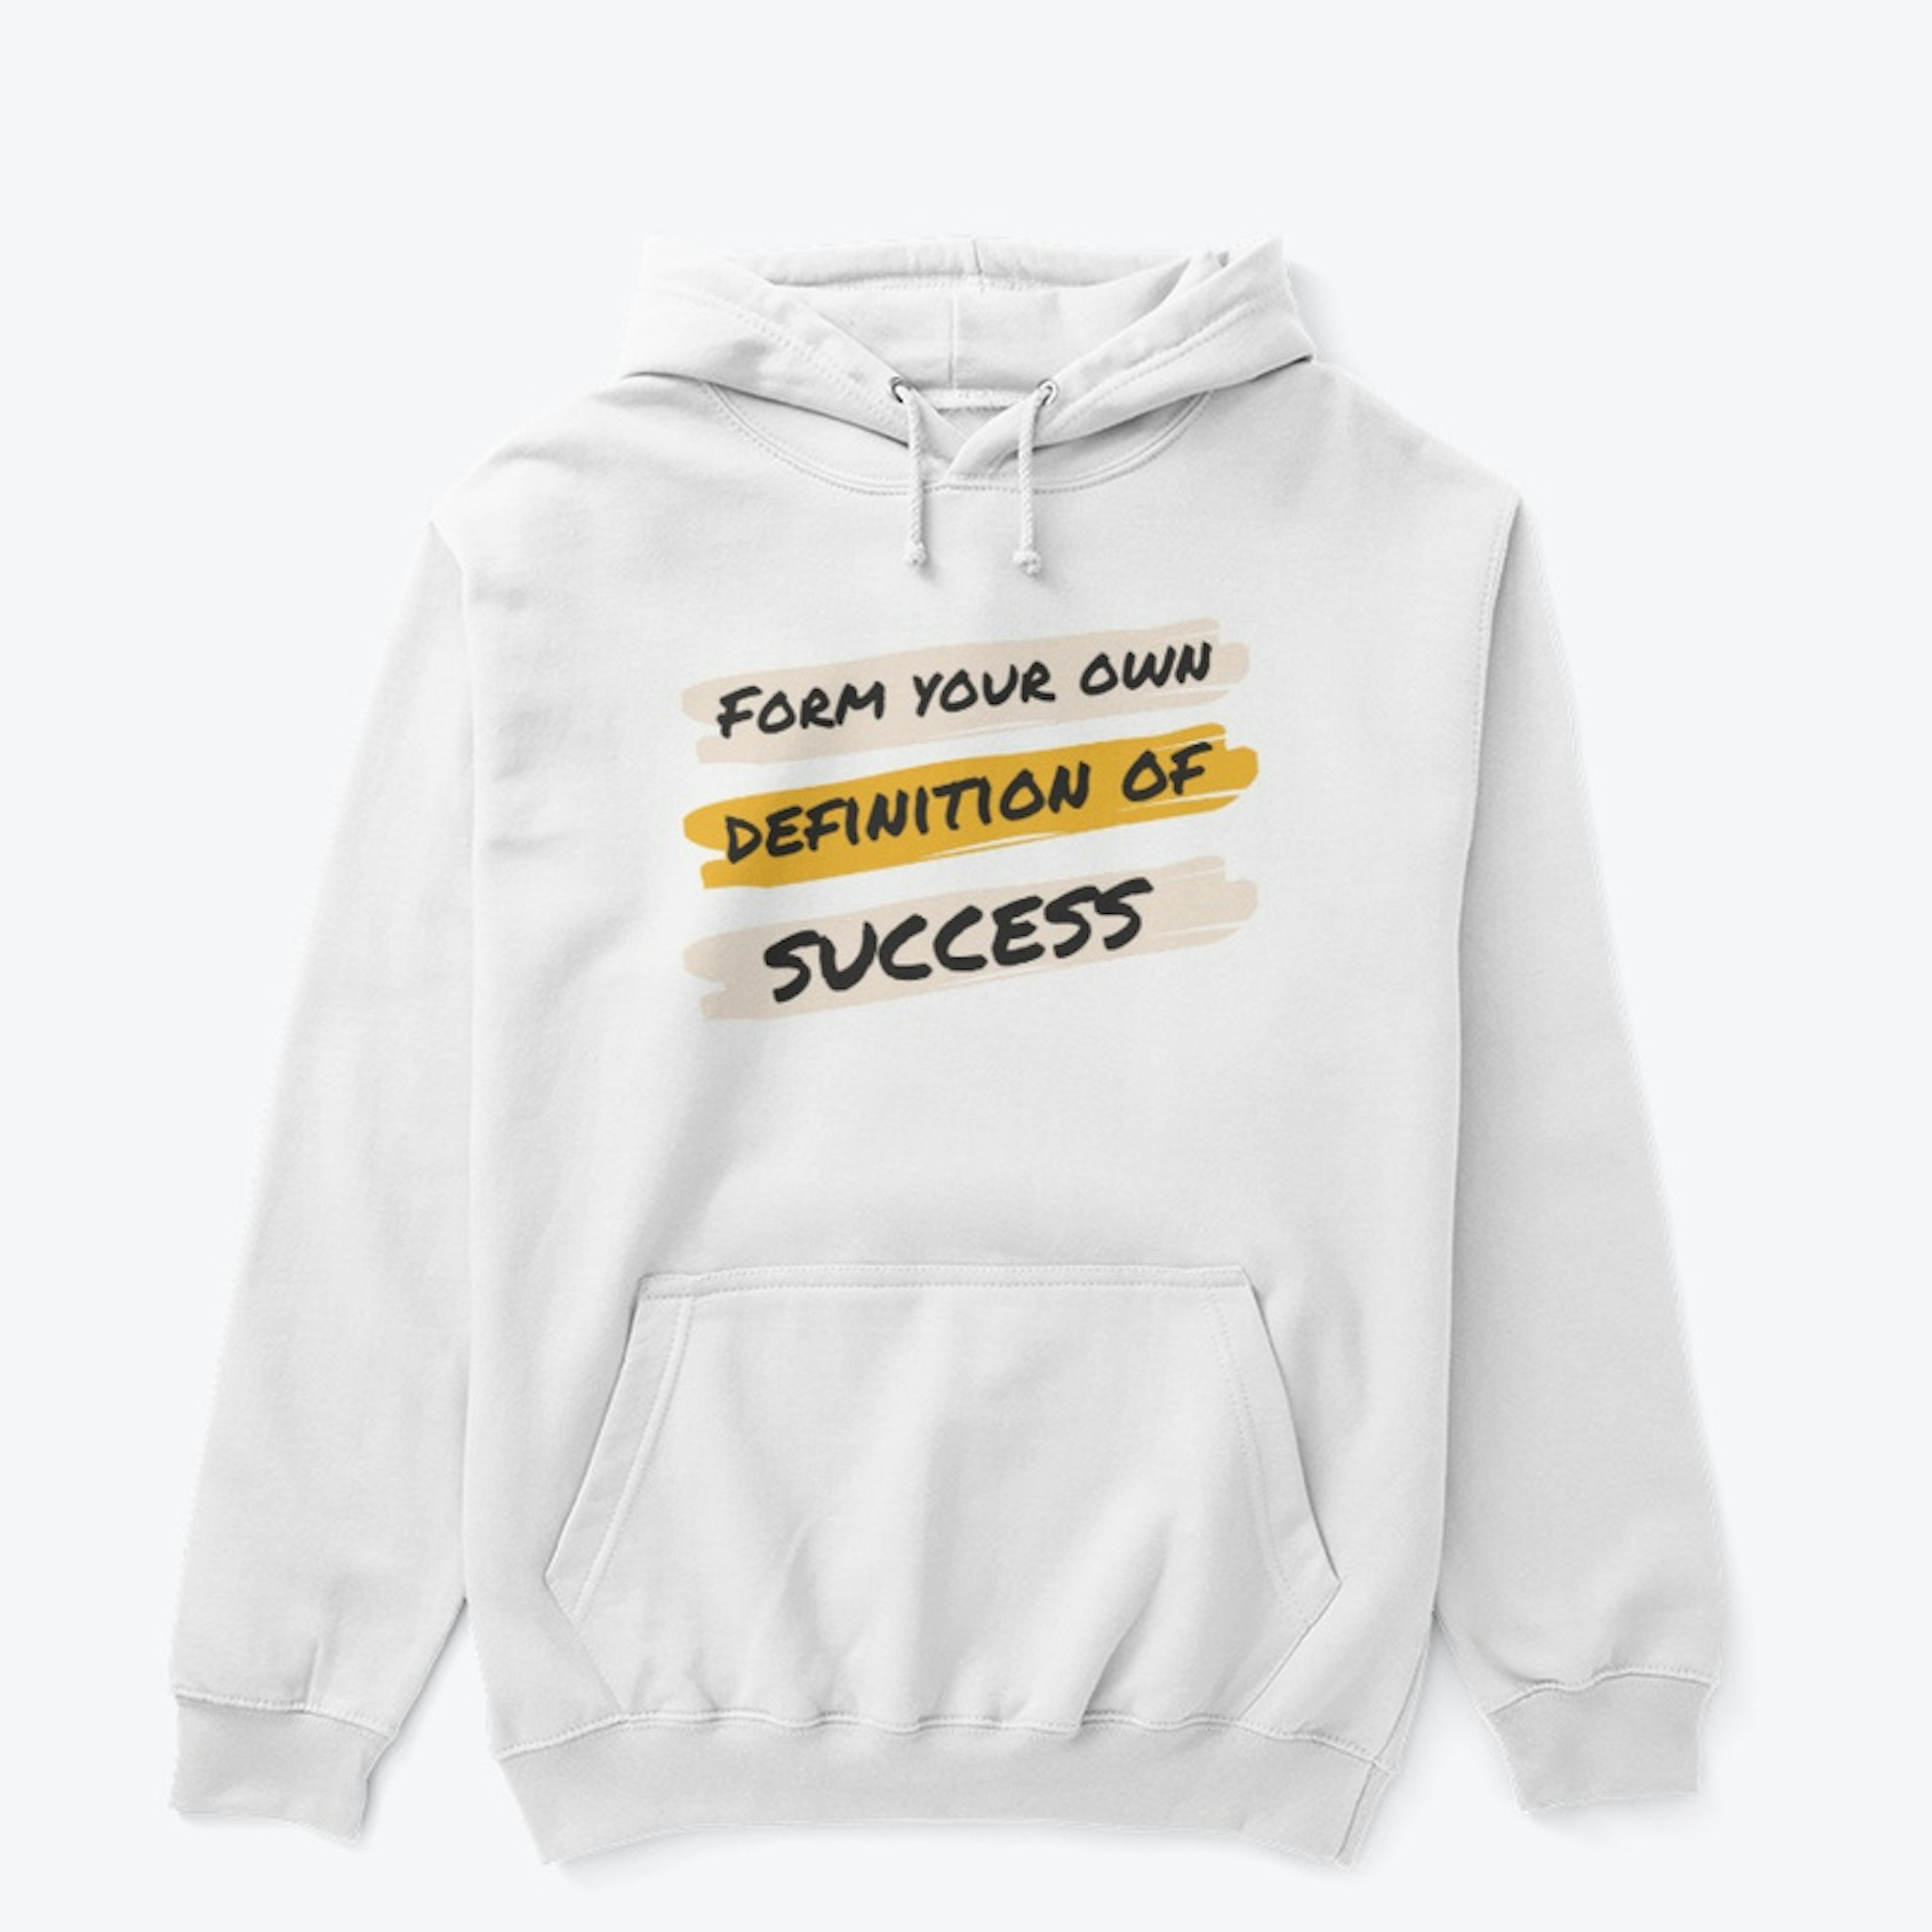 Form your definition of Success T shirt